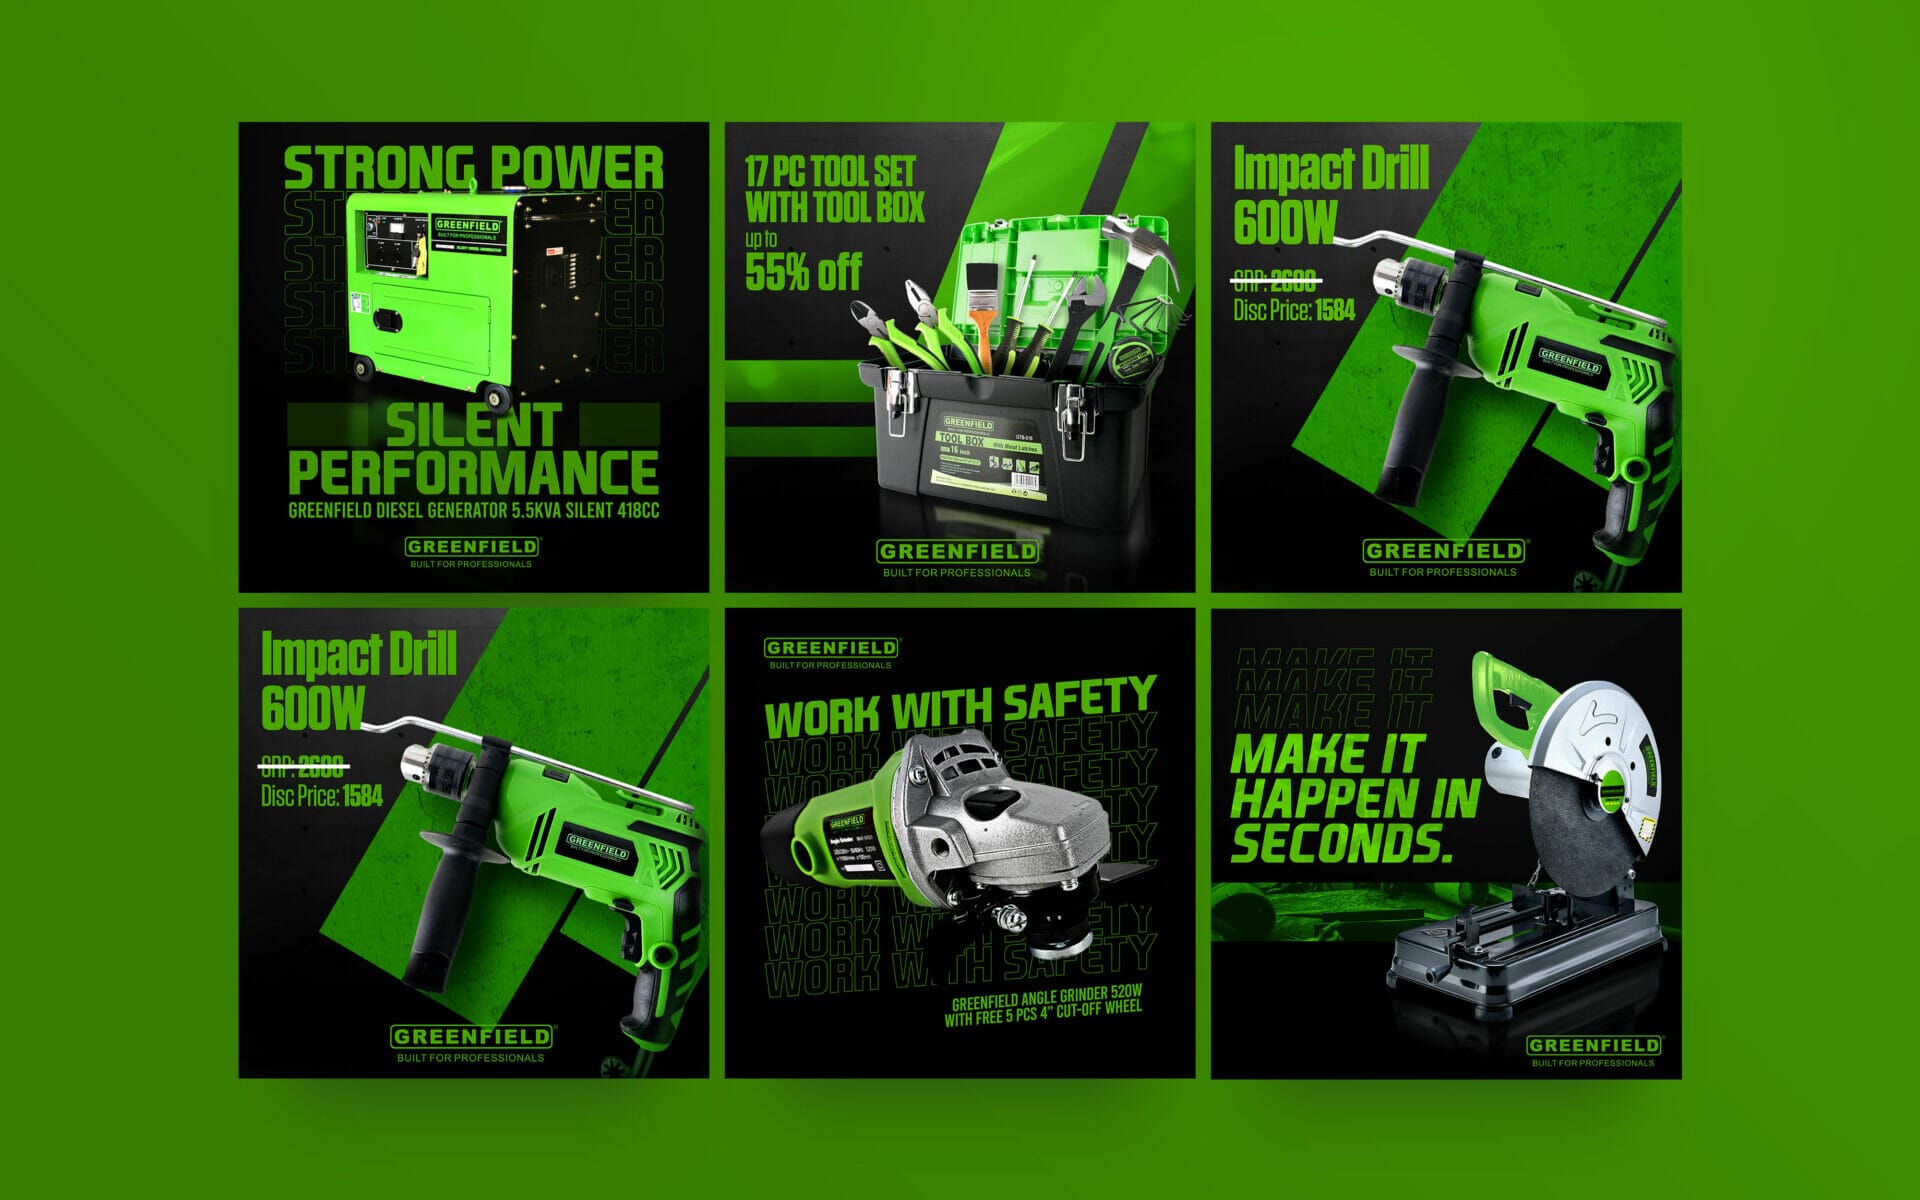 A set of green power tools on a black background.